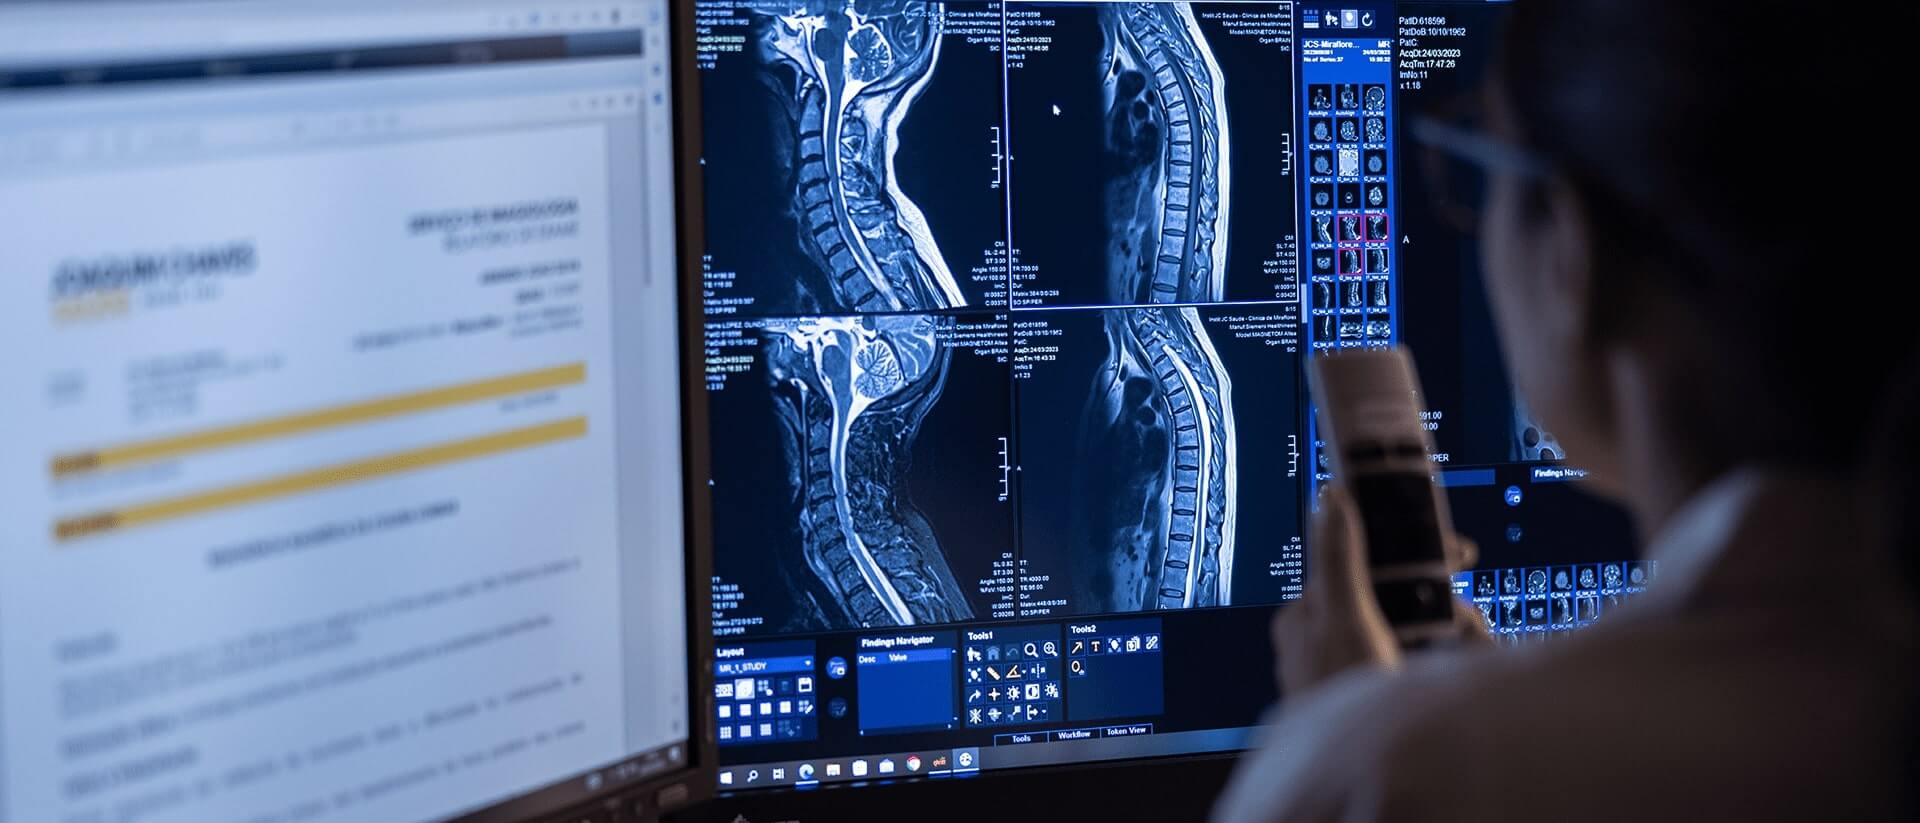 Monitors with images of the central nervous system 